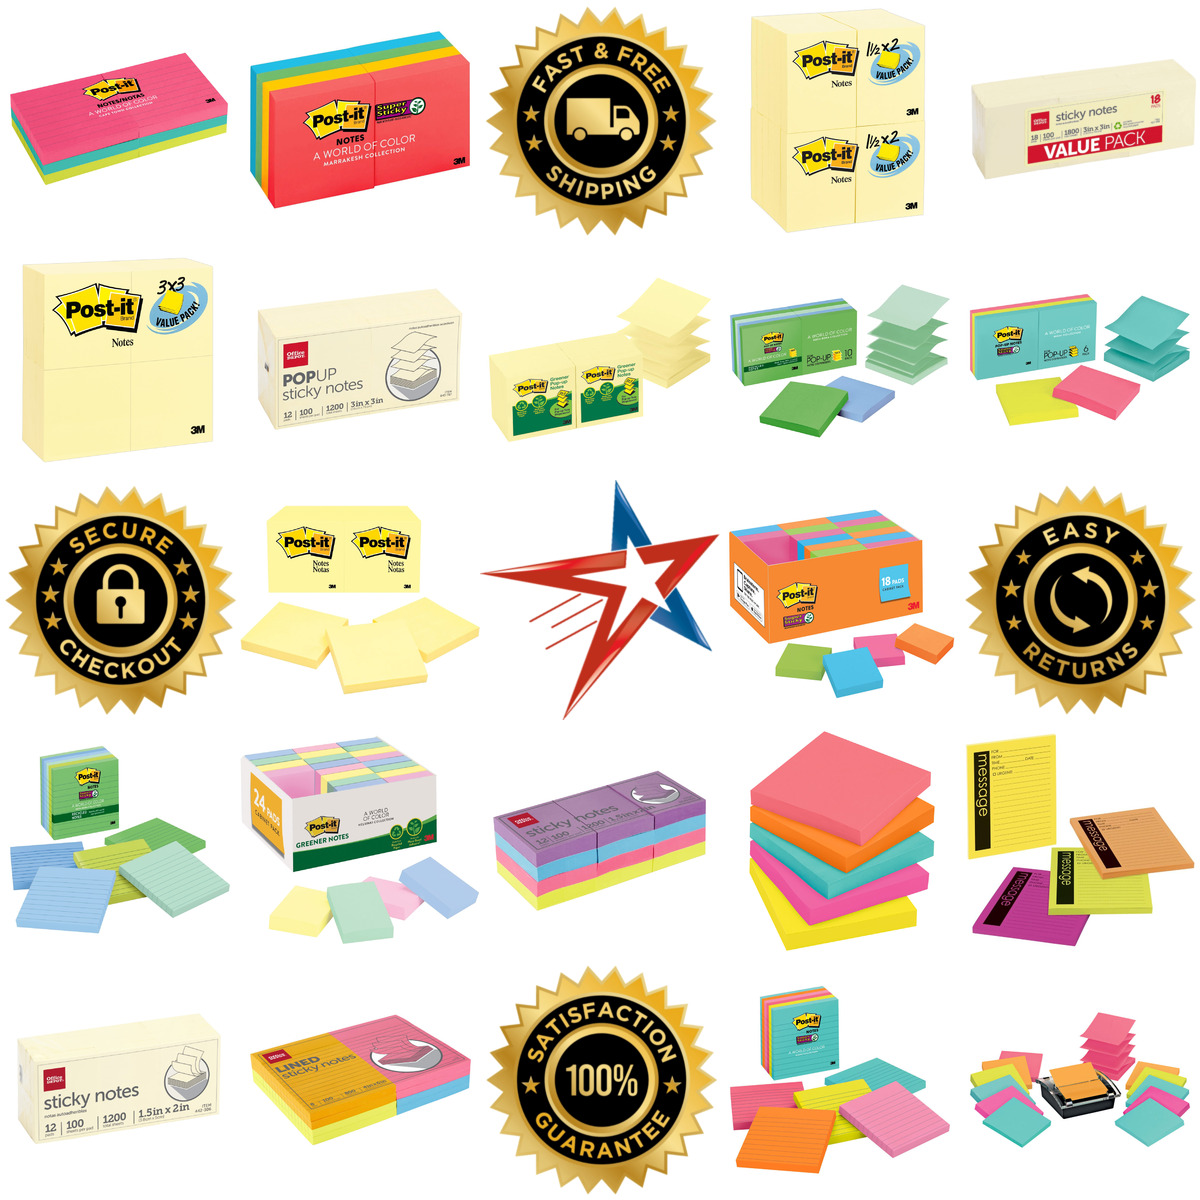 A selection of Sticky Notes products on GoVets